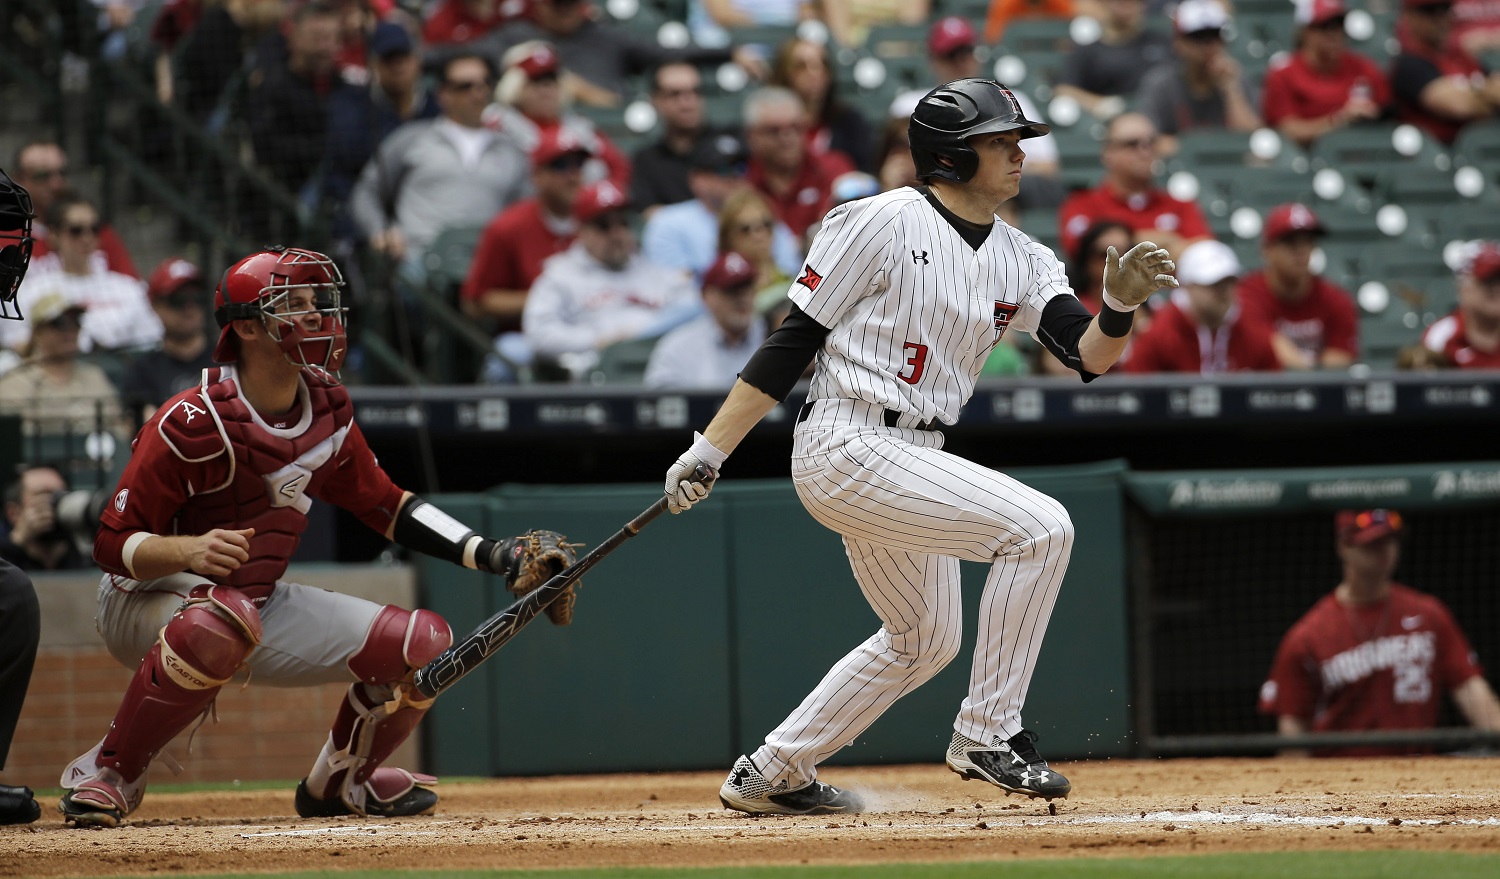 Texas Tech's Michael Davis (3) hits a two-run double as Arkansas catcher Tucker Pennell watches during the first inning of a College Classic baseball game Sunday, Feb. 28, 2016, in Houston. (AP Photo/David J. Phillip)